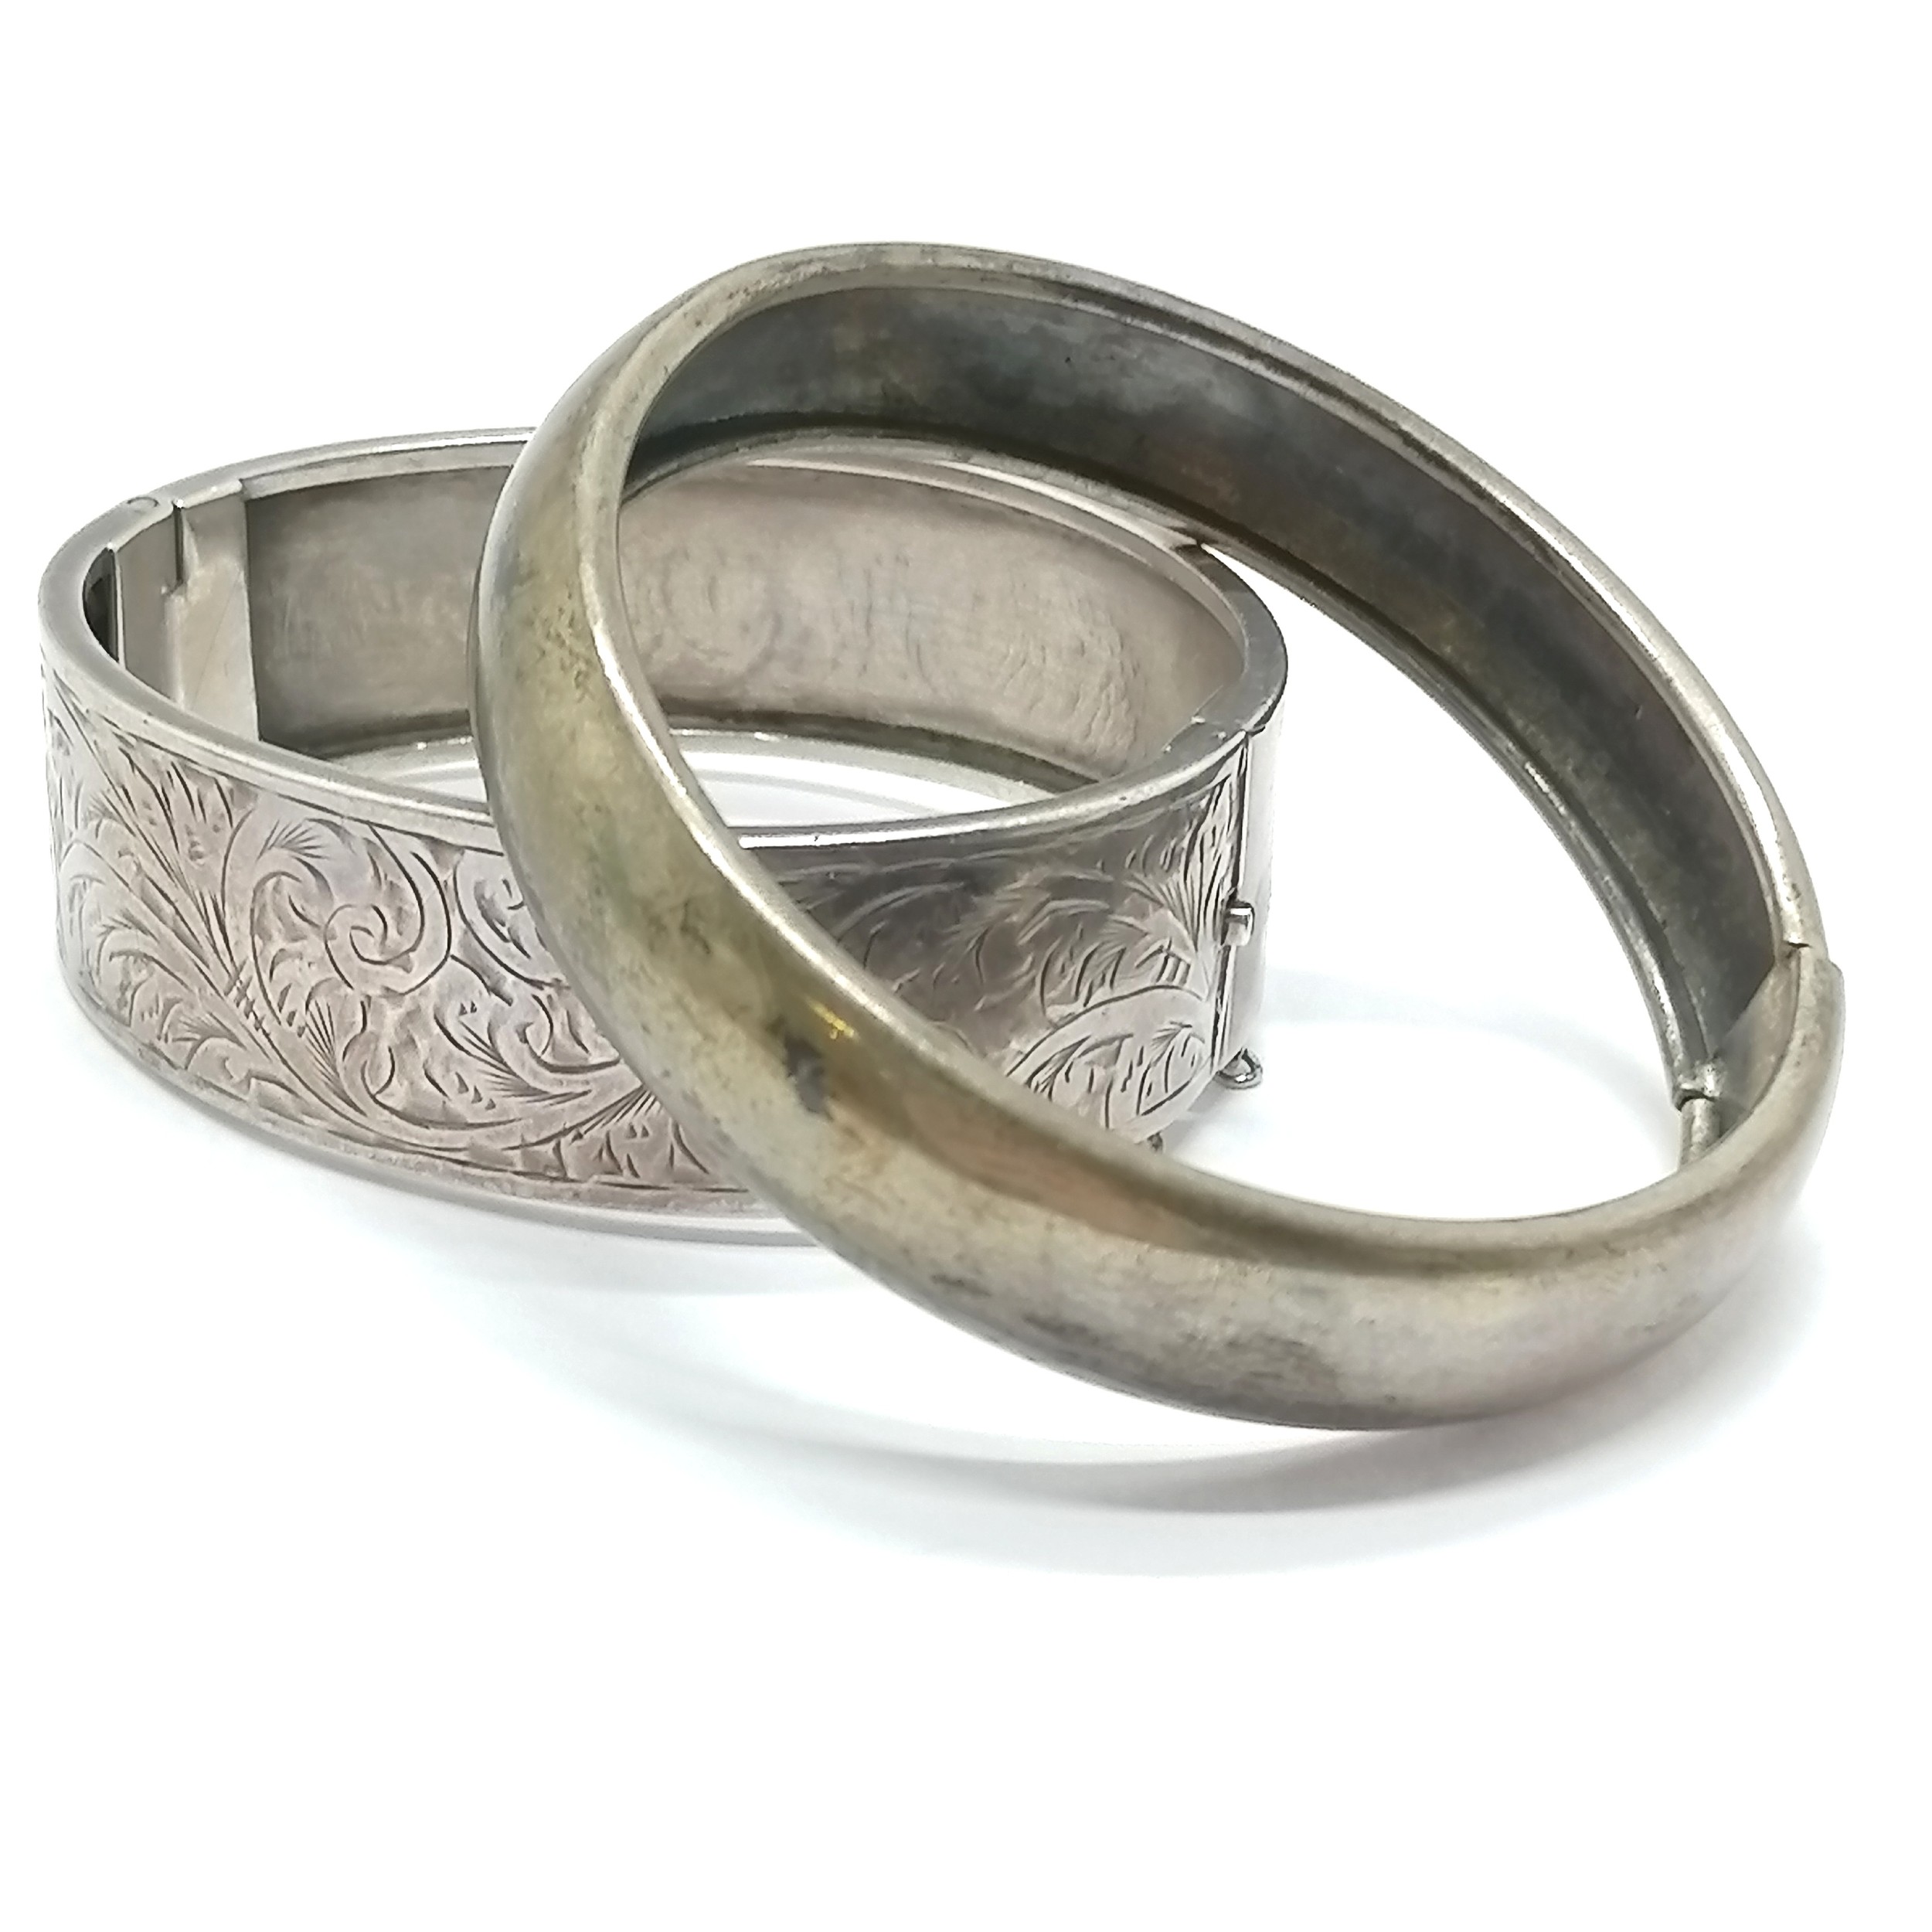 2 x silver bangles (1 unmarked & engraved has dents) - 45g